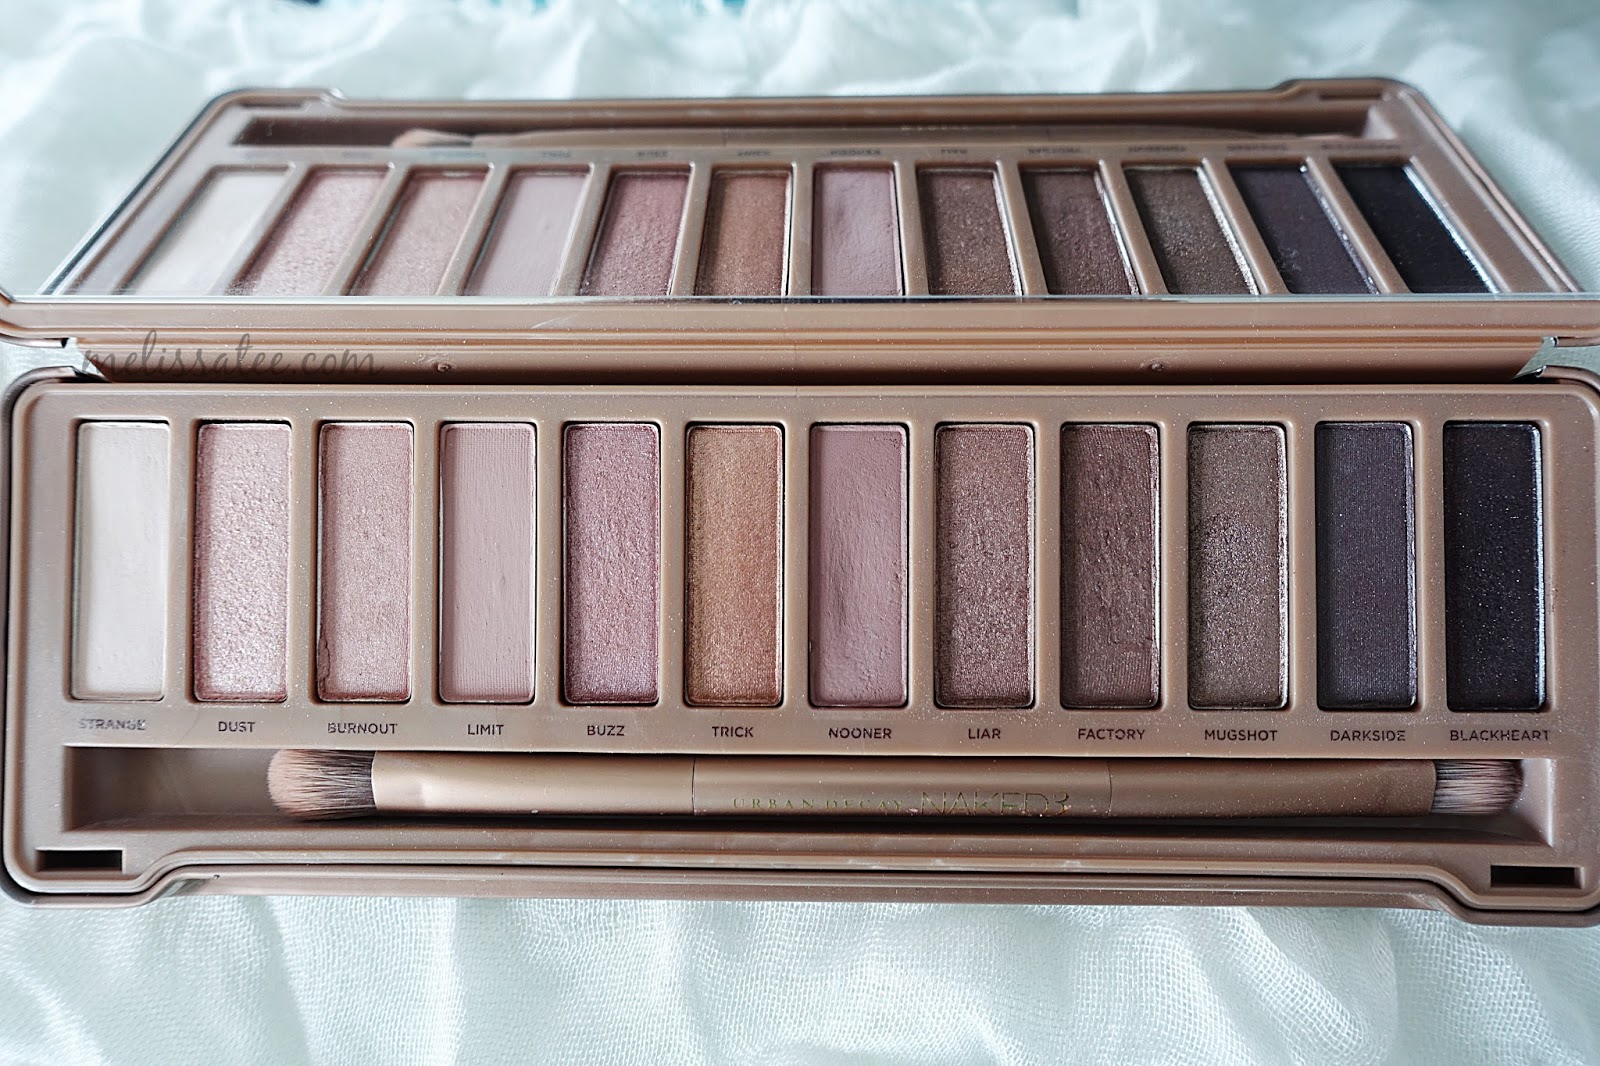 Urban Decay Naked3 Eyeshadow Palette Review & Swatches